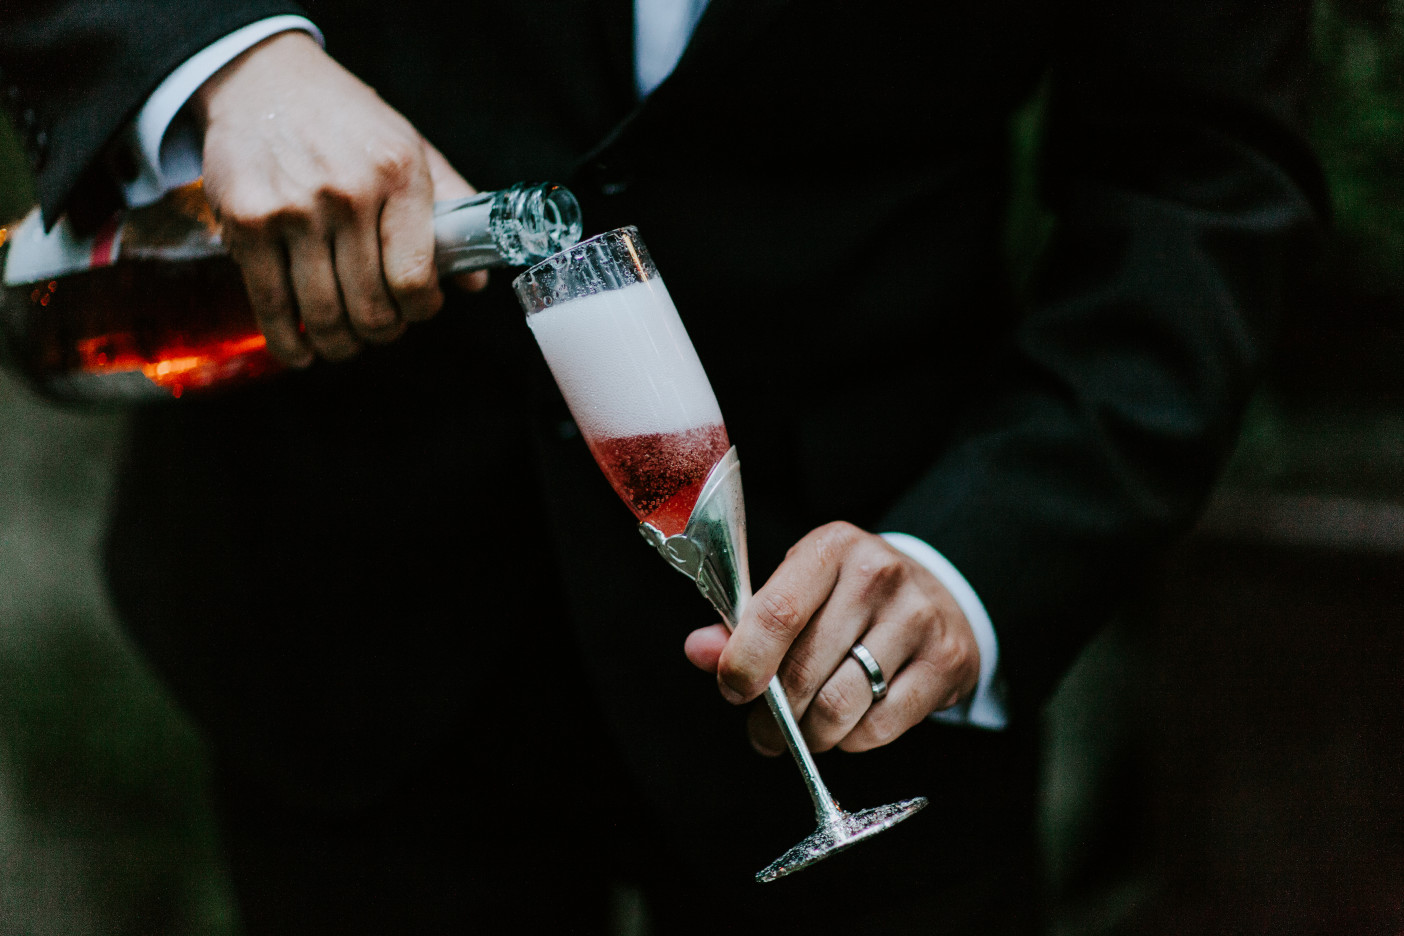 Sam pours a bottle of champagne at Skamania House, Washington. Elopement photography in Portland Oregon by Sienna Plus Josh.